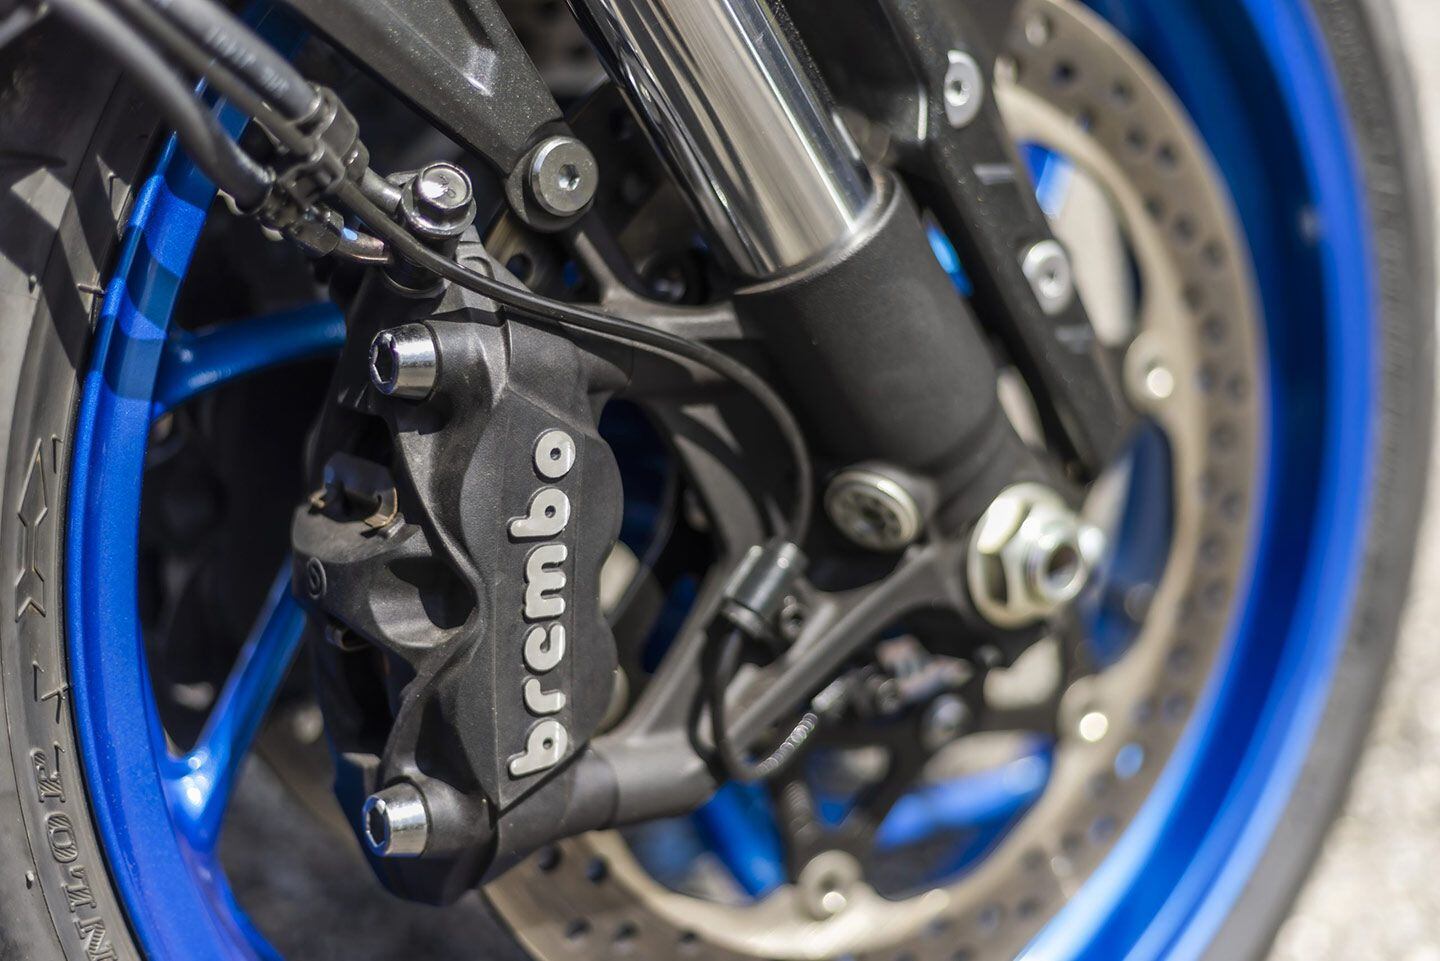 Brembo four-piston brakes are used up front.